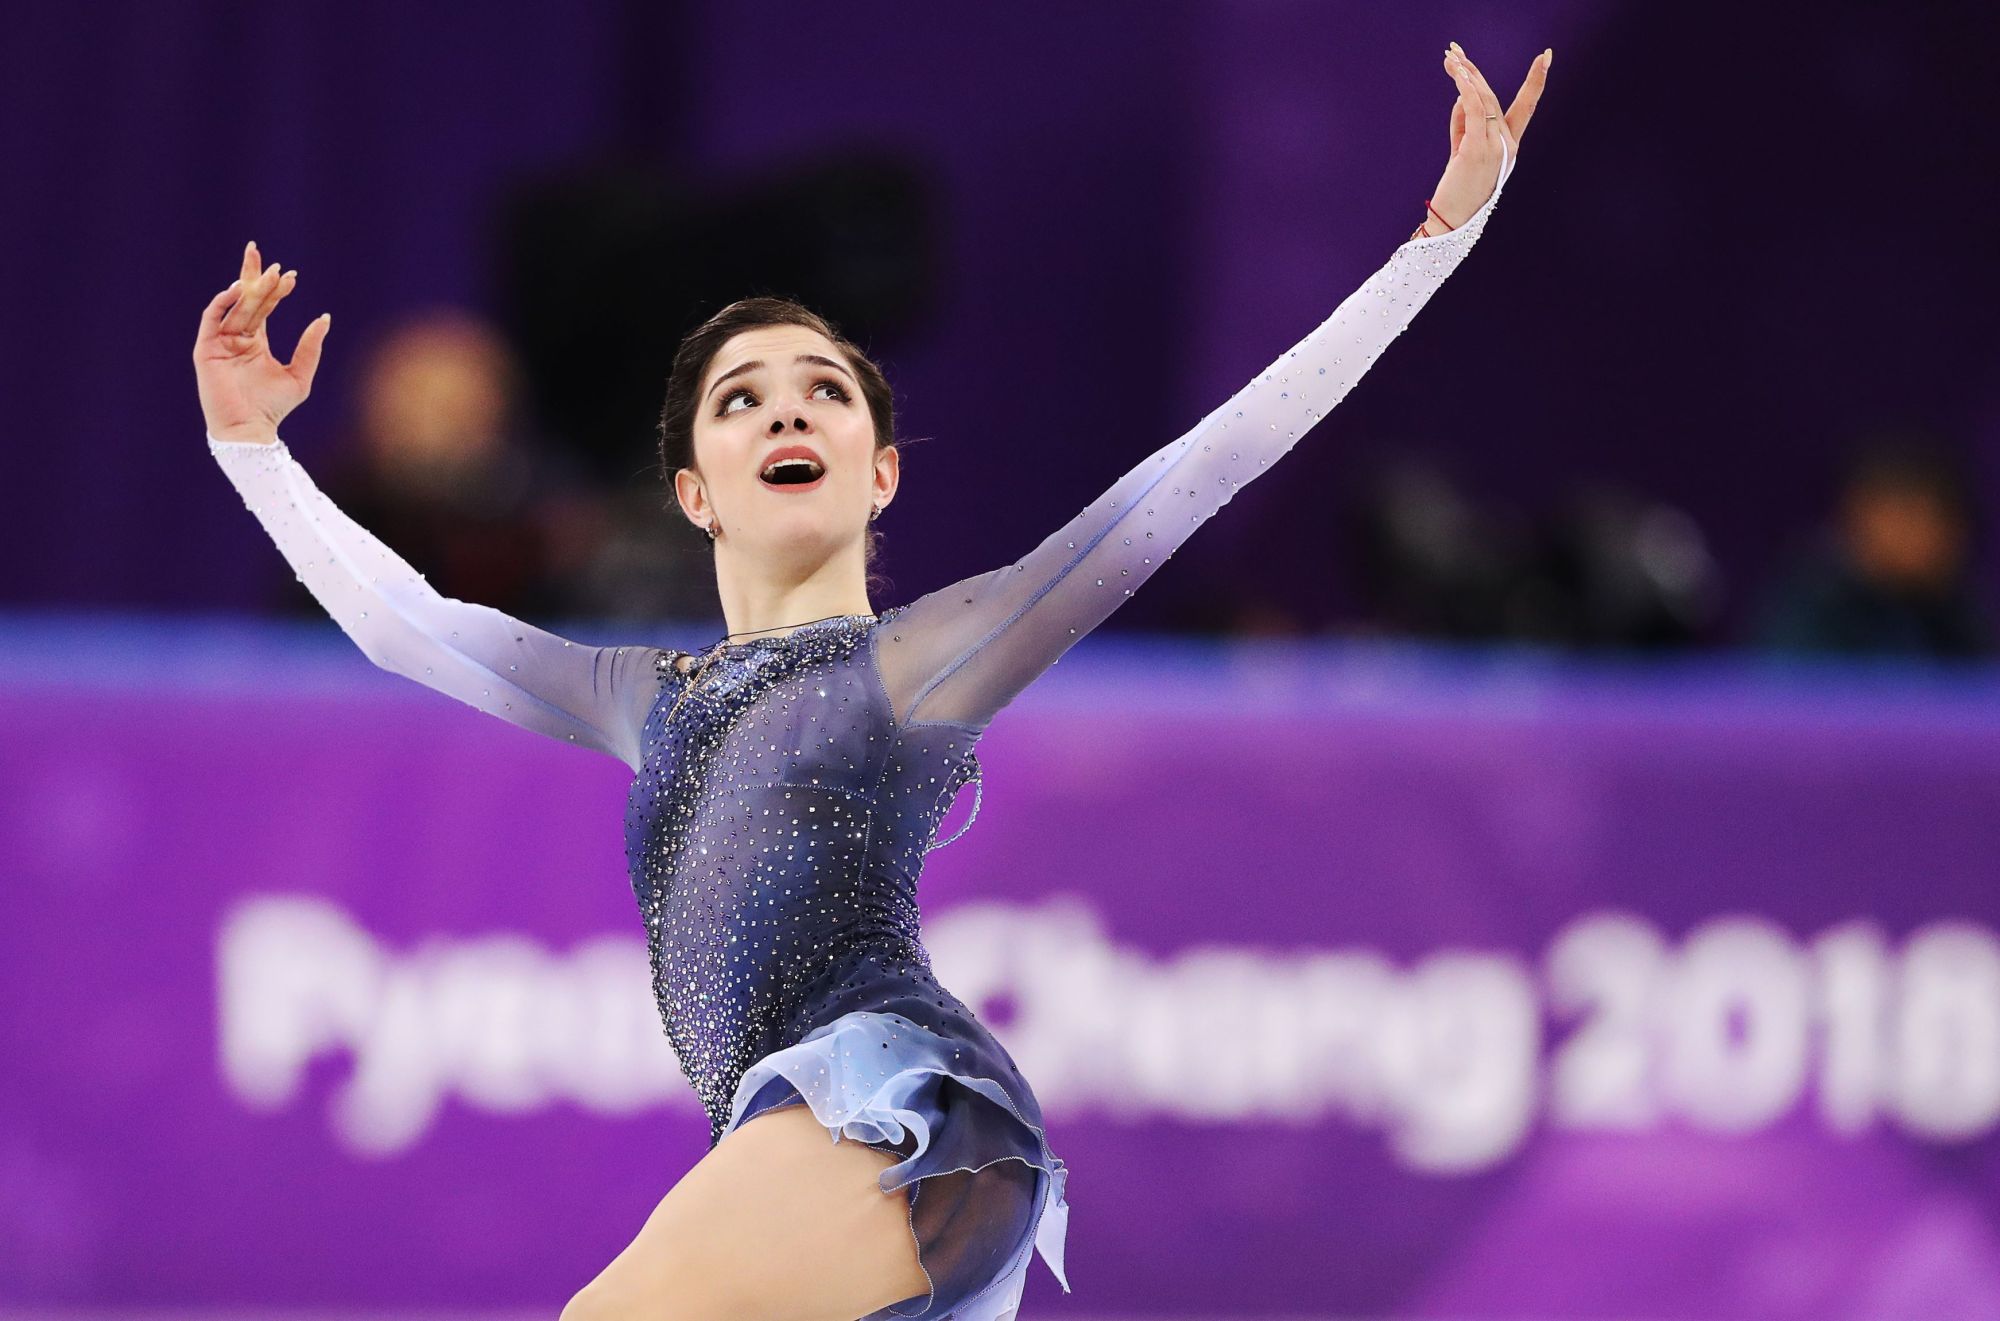 Russian Olympic Figure Skater Medvedeva Reportedly Splits with Coach